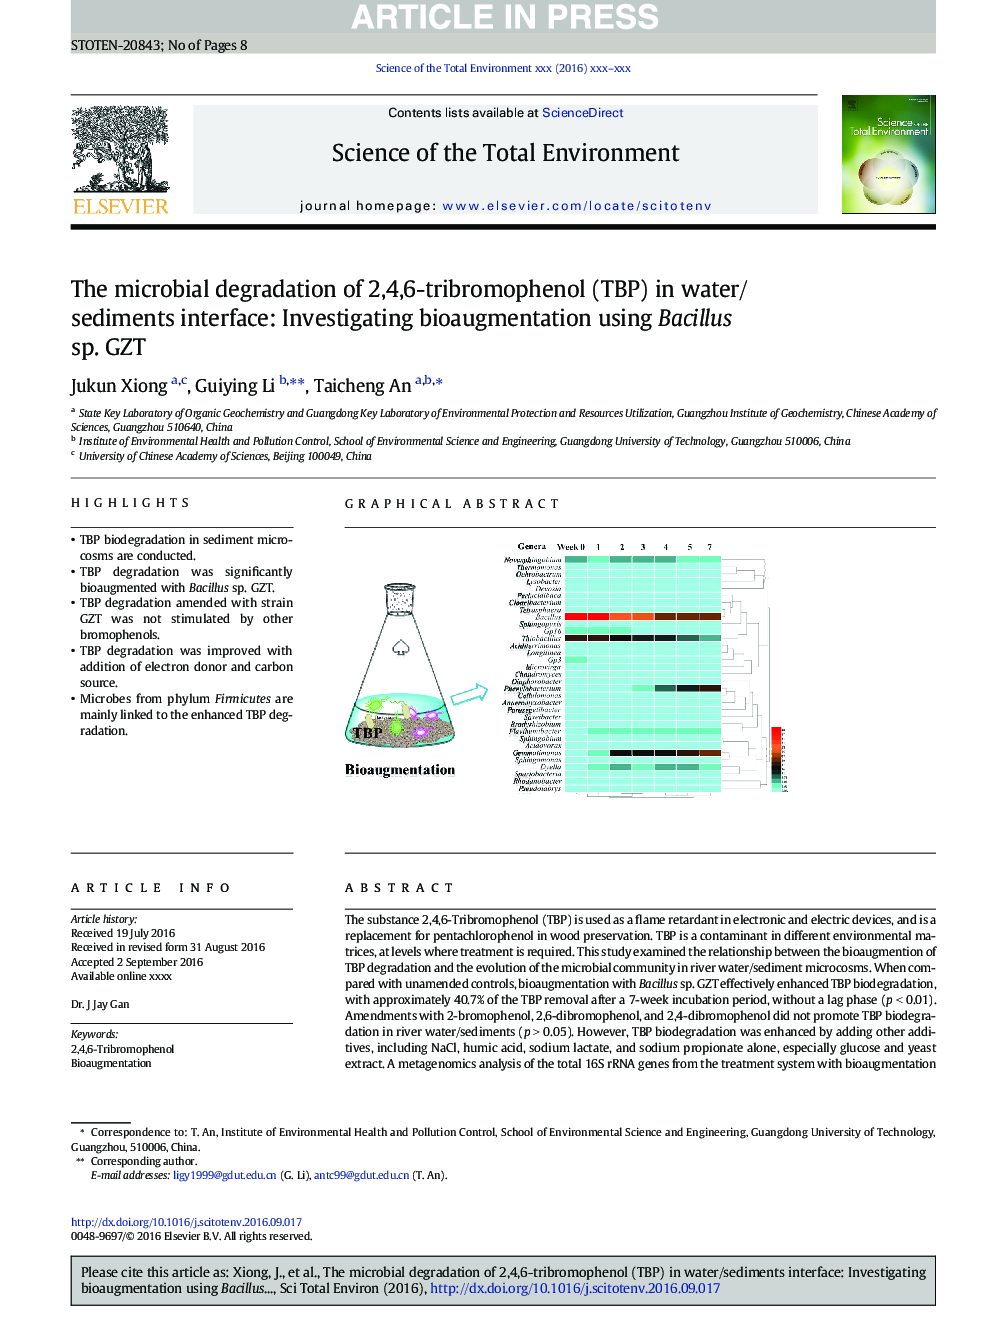 The microbial degradation of 2,4,6-tribromophenol (TBP) in water/sediments interface: Investigating bioaugmentation using Bacillus sp. GZT